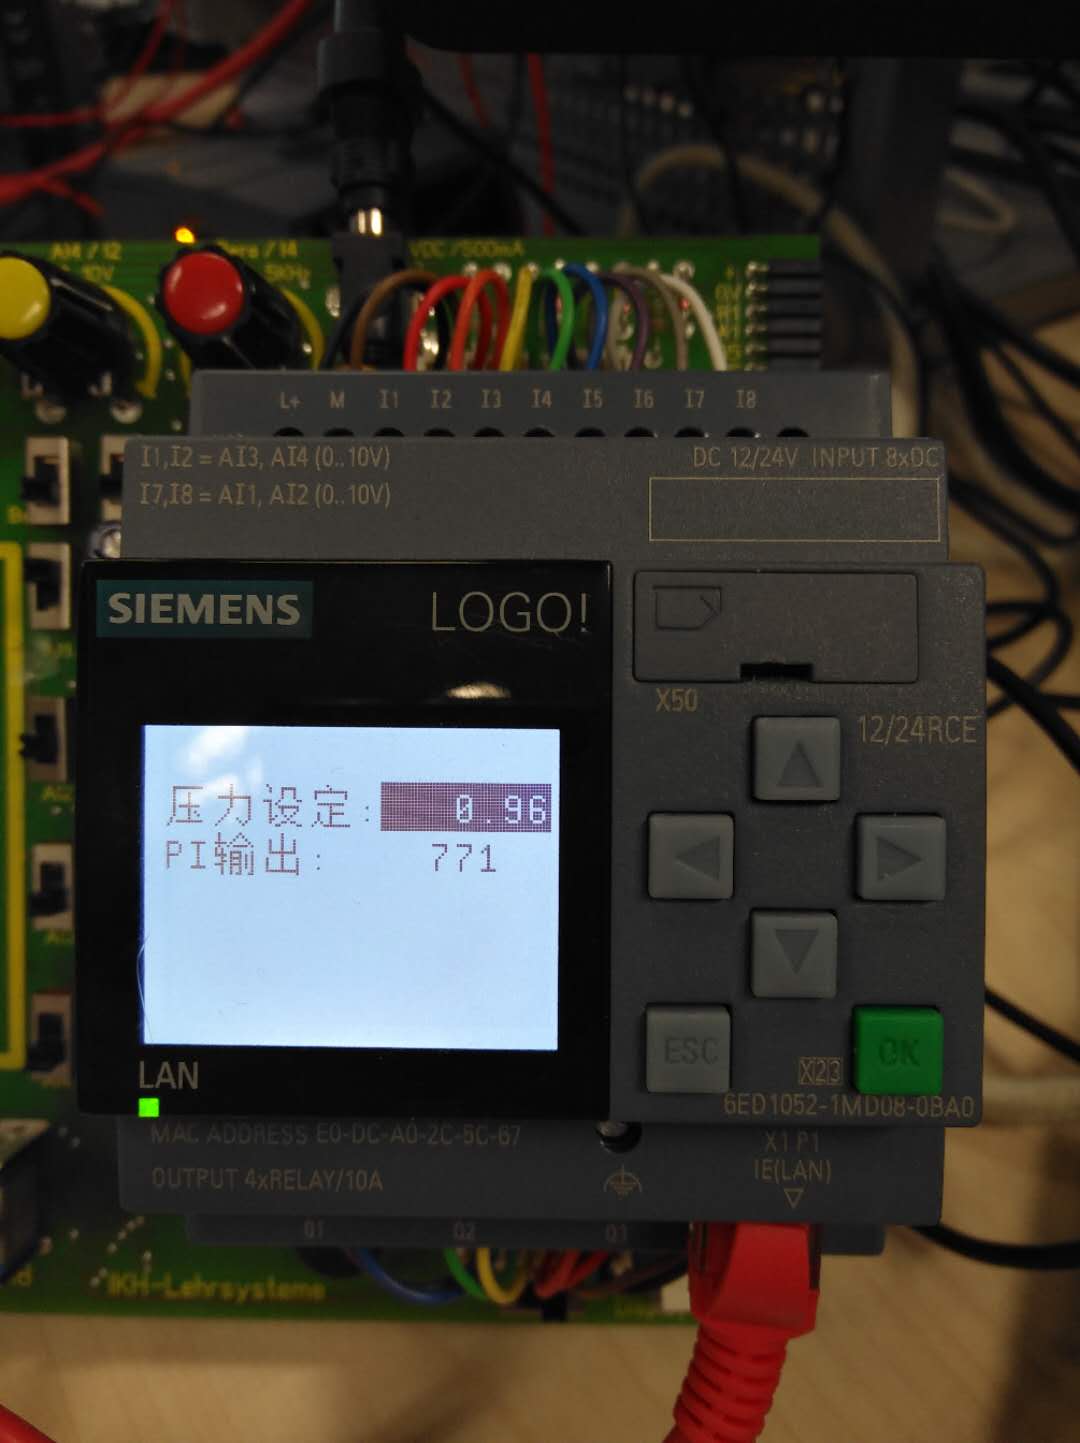 Close-up of a machine with a display

Description automatically generated